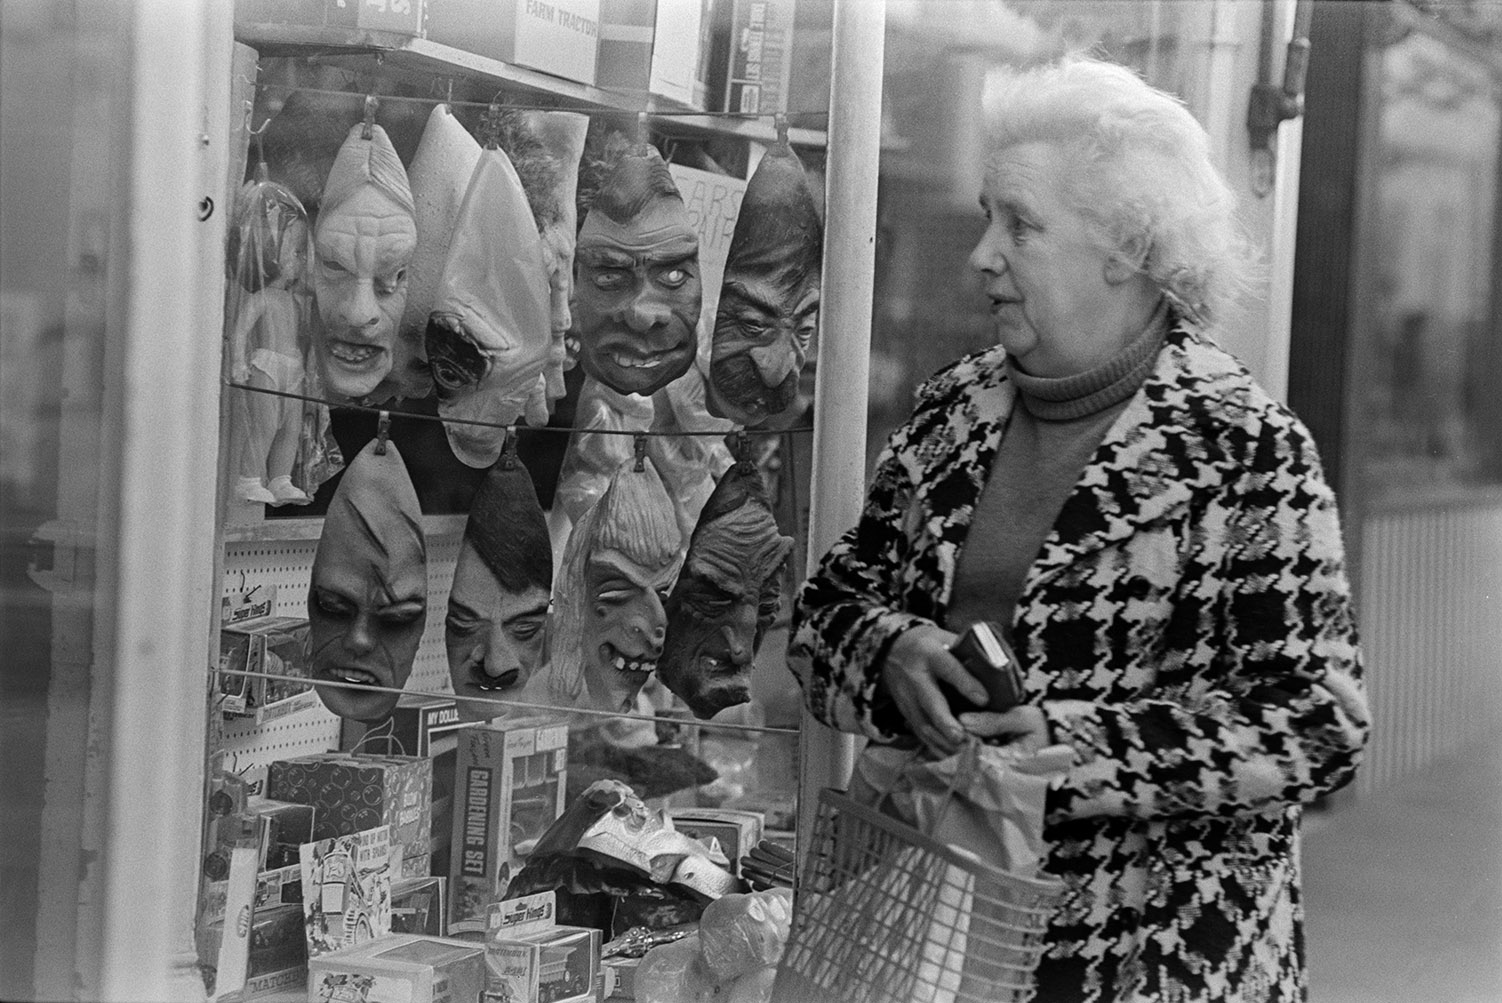 A woman looking at masks on display, in a shop front window in Barnstaple.